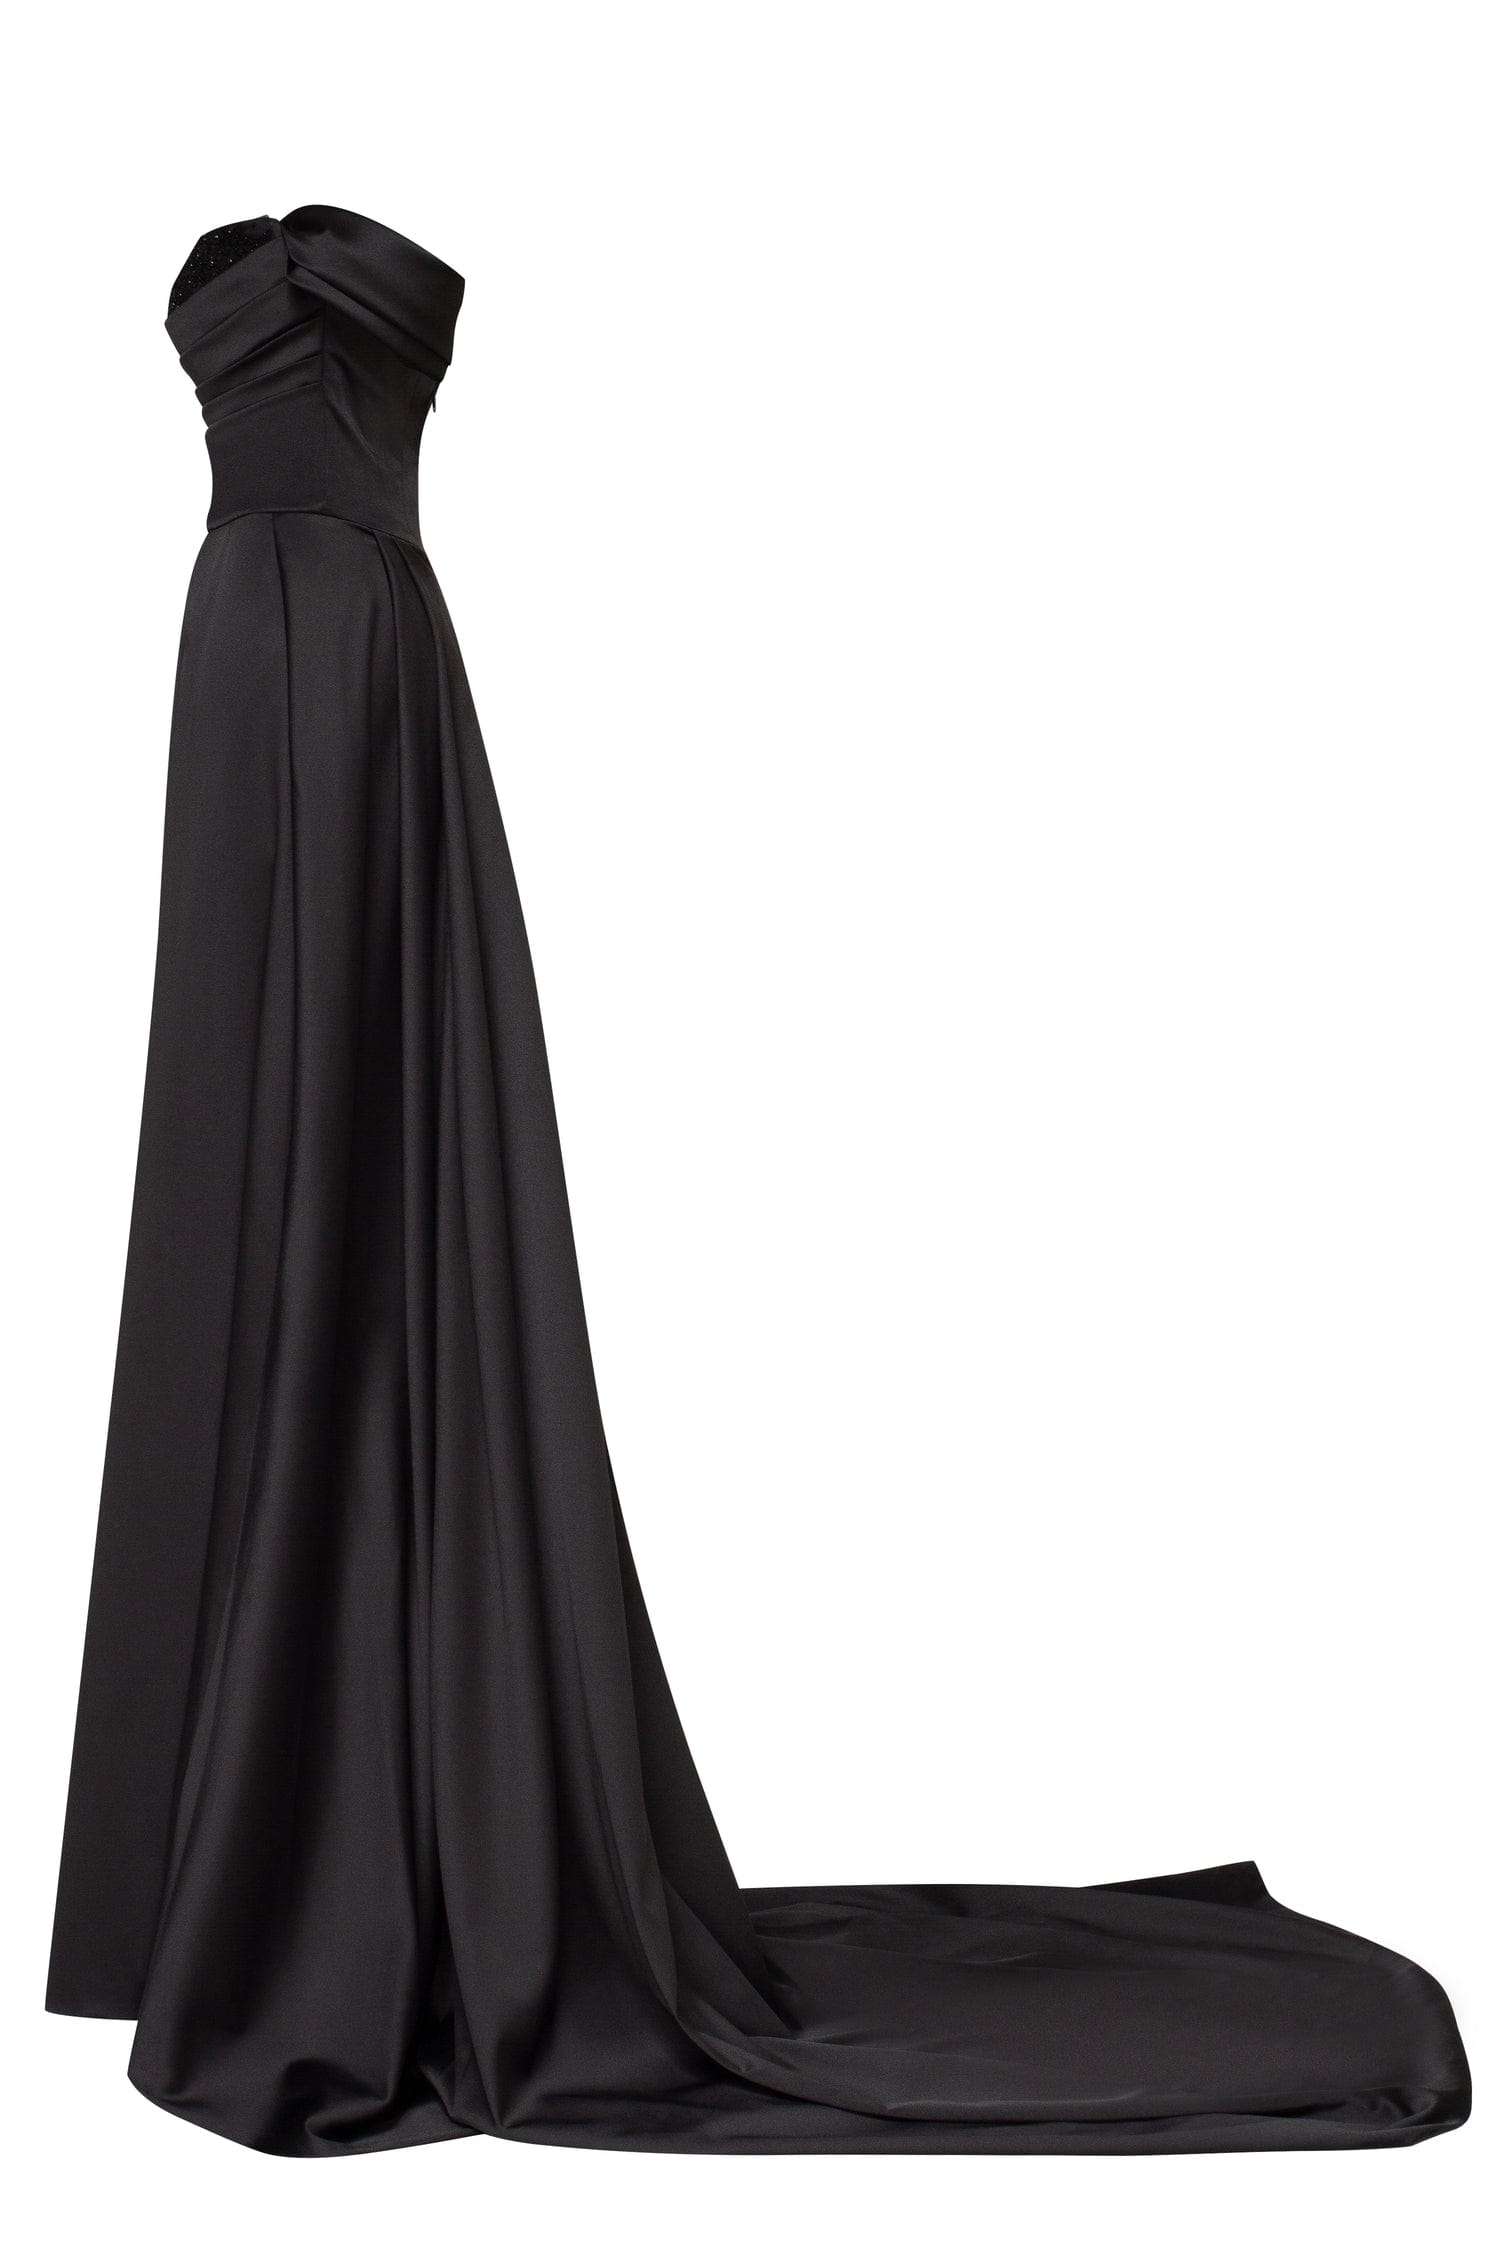 Modest / Simple Black Suede Prom Dresses 2021 A-Line / Princess Ball Gown  Off-The-Shoulder Beading Short Sleeve Backless Floor-Length / Long Formal  Dresses